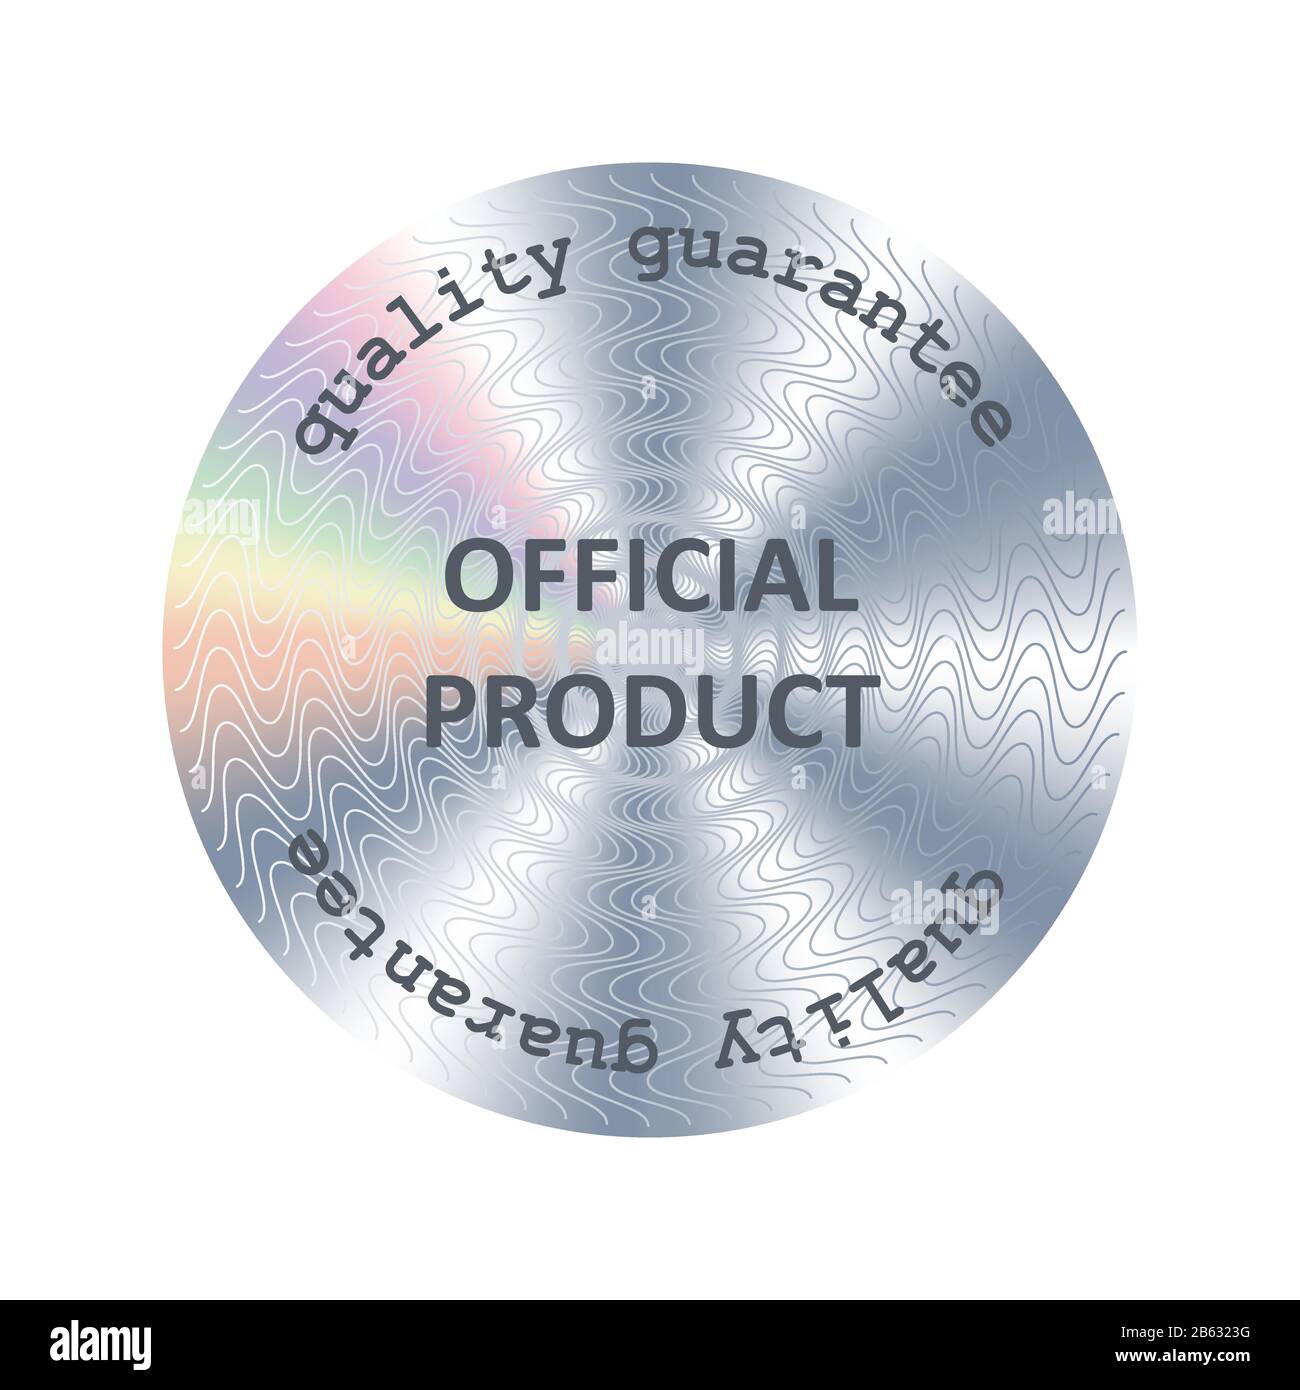 Official product hologram Stock Vector